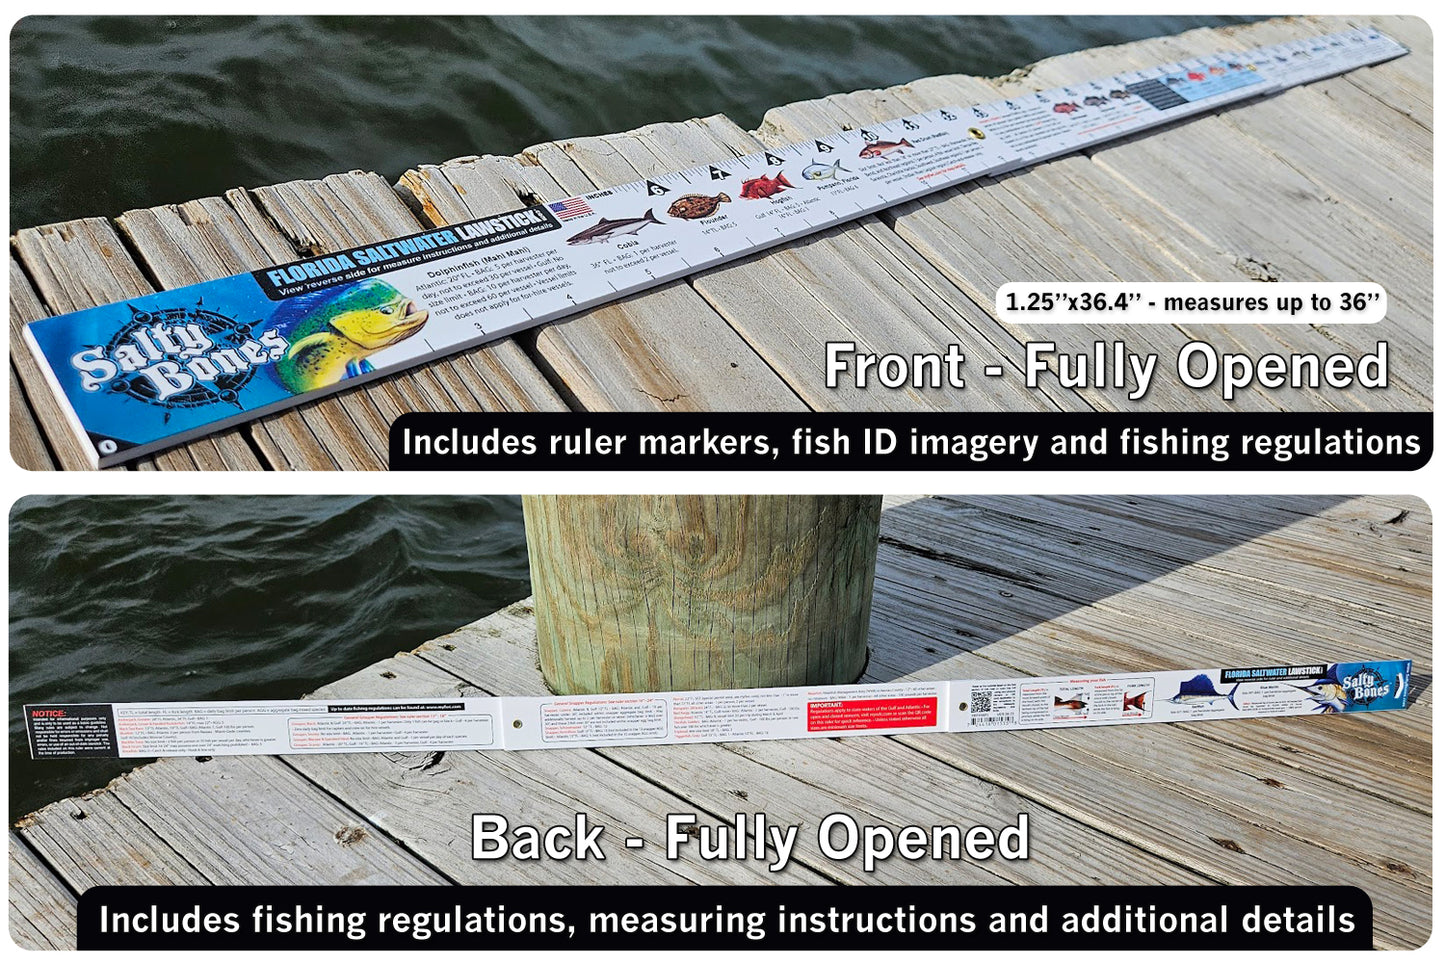 Salty Bones Florida Saltwater Lawstick - Double-Sided 36" Folding Fishing Ruler with Florida's Atlantic and Gulf Guidelines